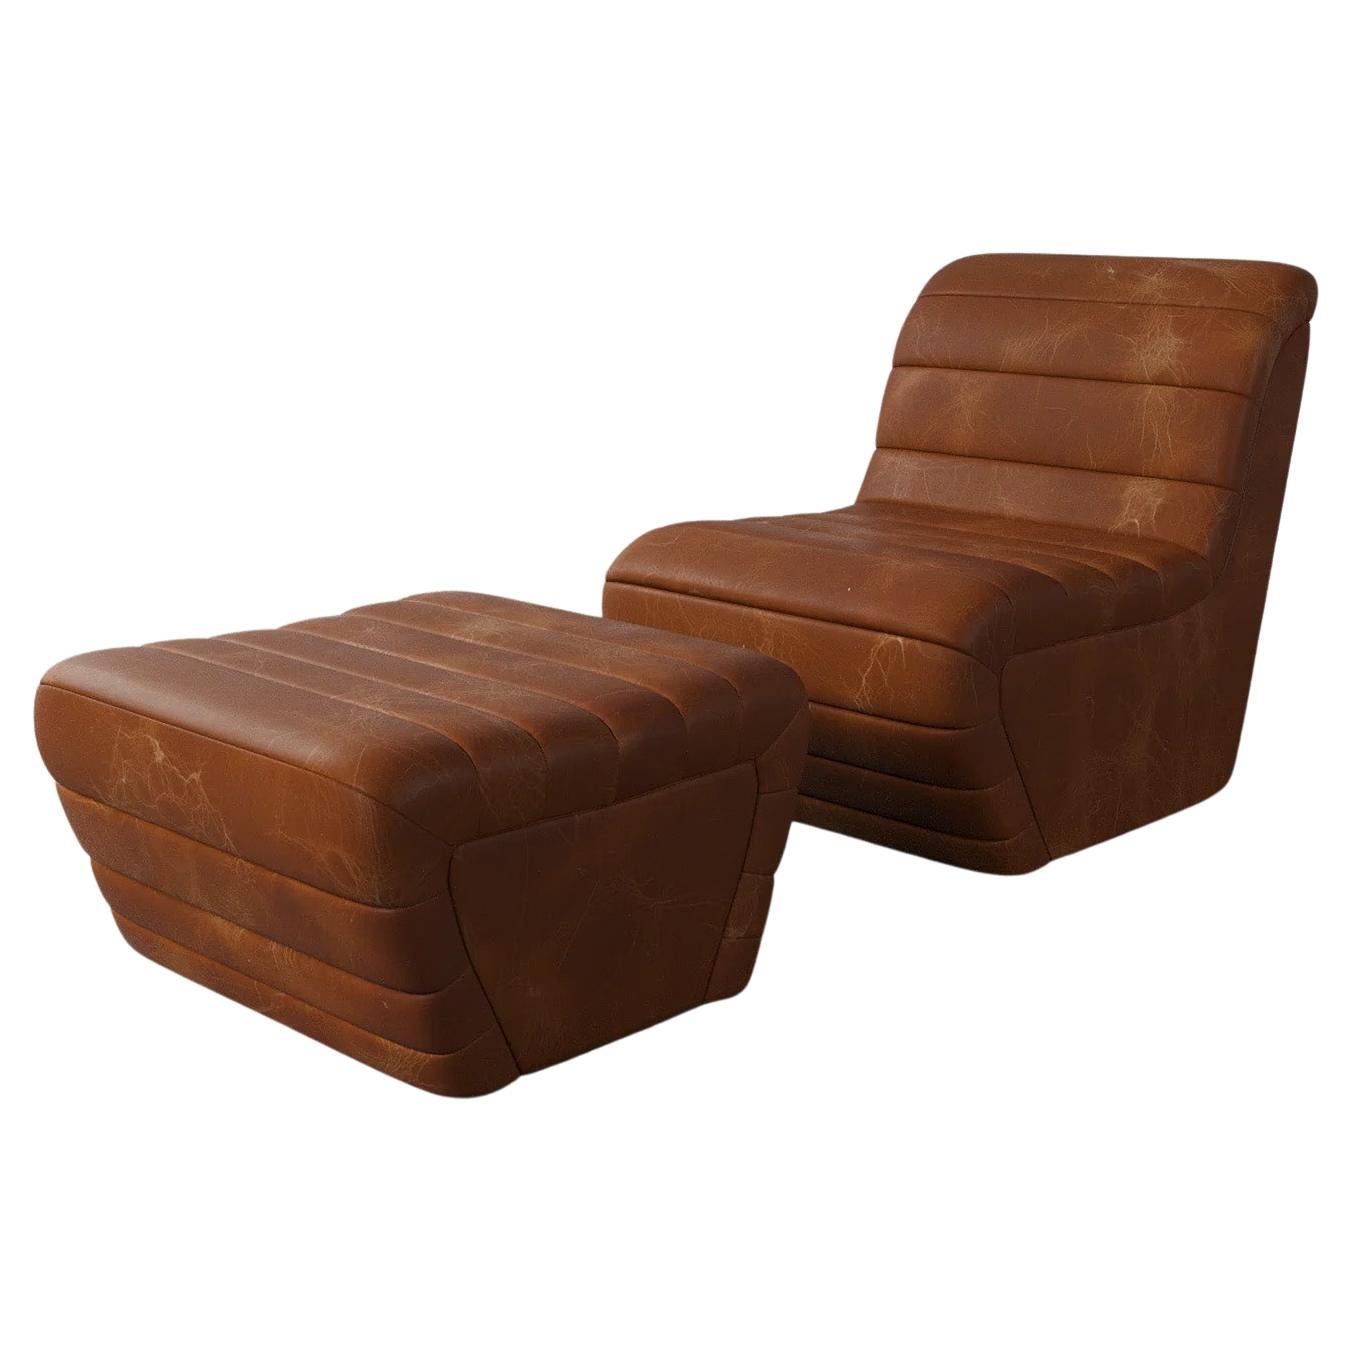 This perfectly proportioned lounge chair is inspired by midcentury Swiss design, reworked with a modernist perspective and upholstered with cleanly tailored horizontal channeling. Pair with the Brunoy ottoman for the ultimate in comfort. Listing